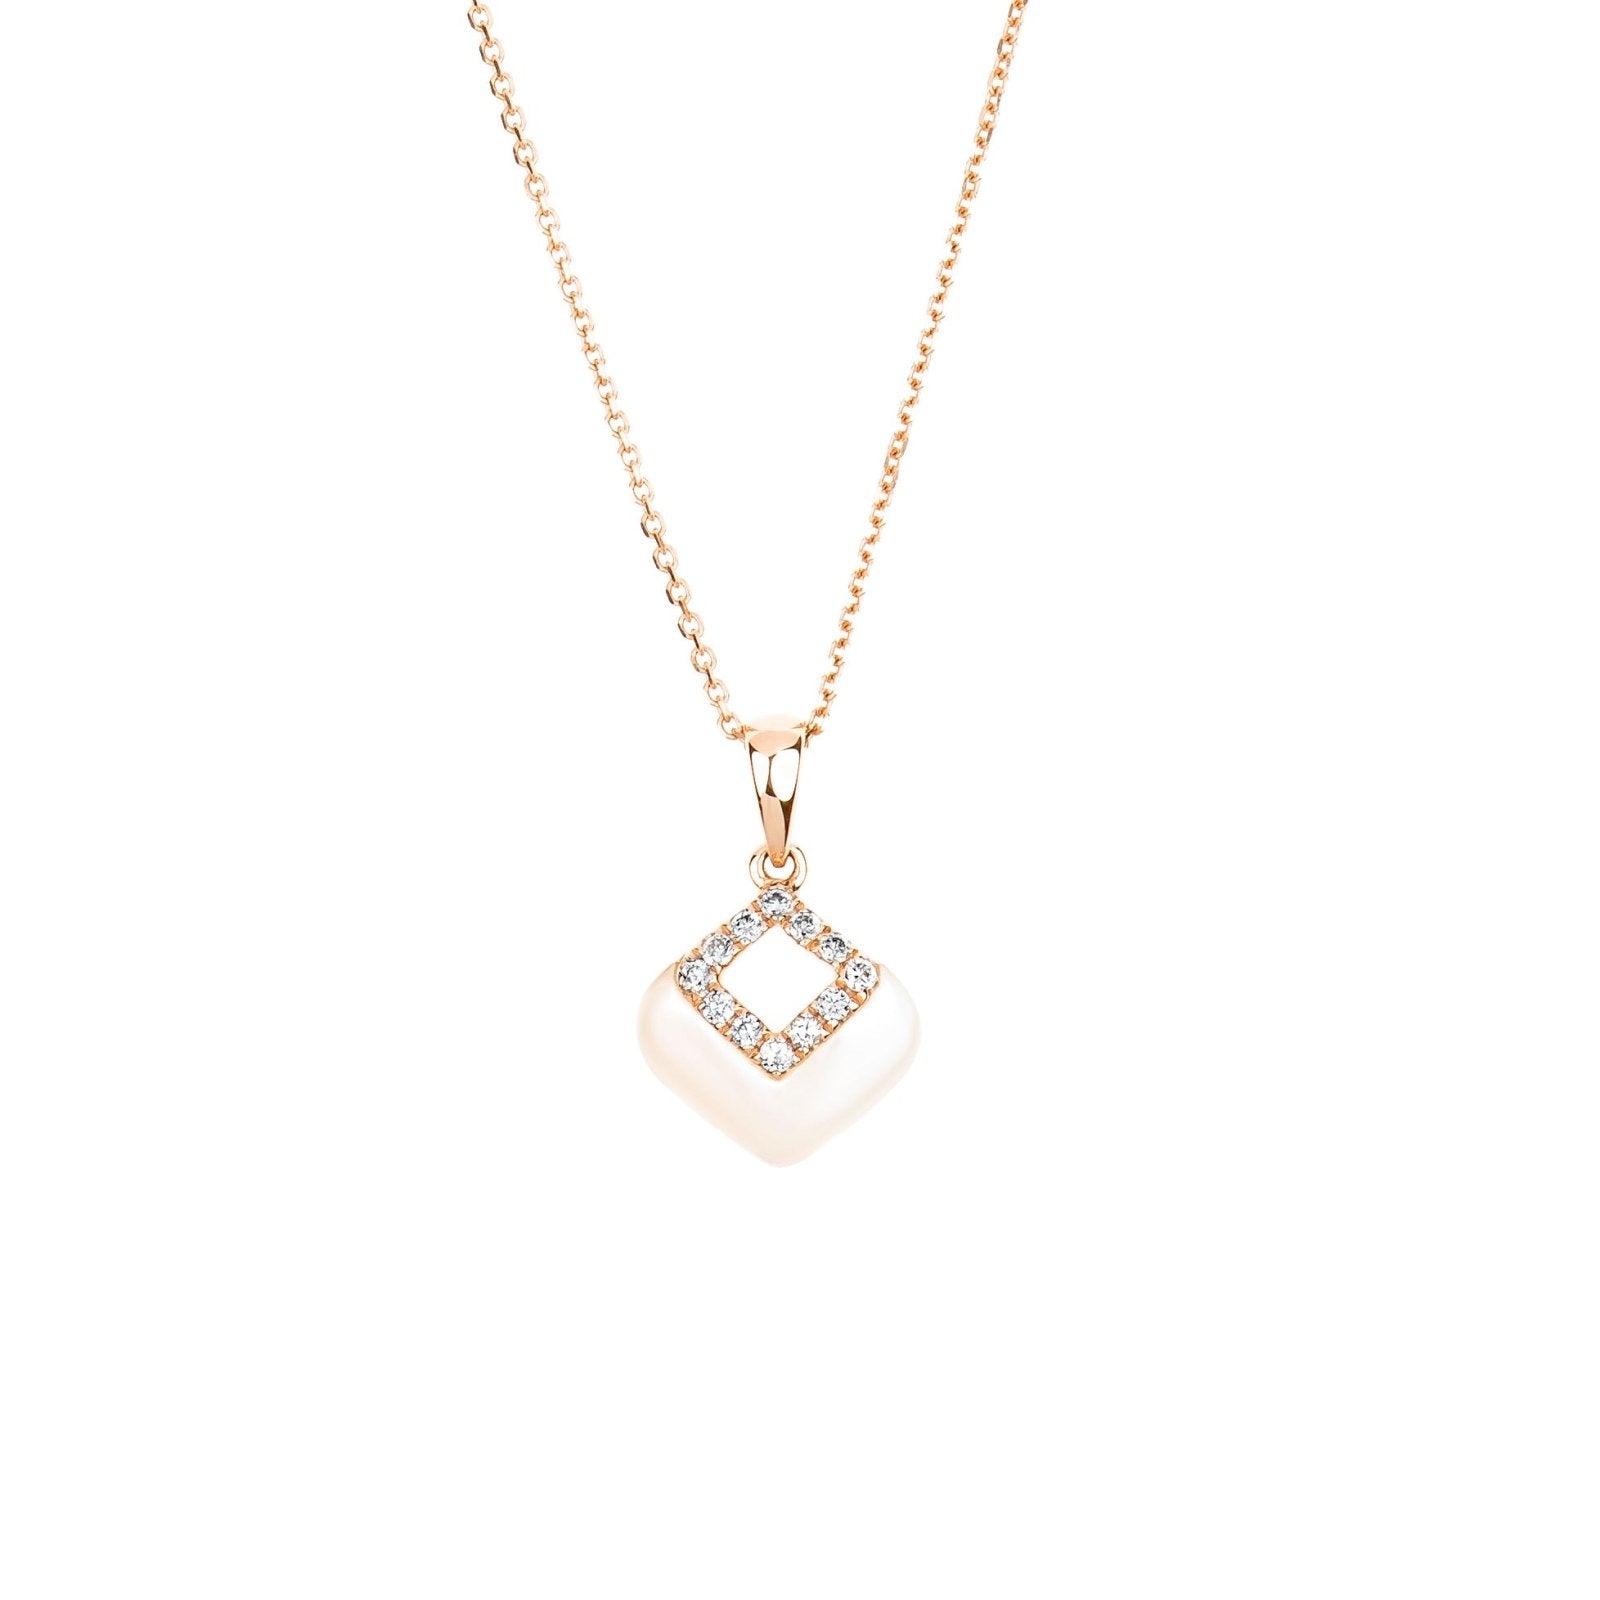 Mother of Pearl and Diamond Cutout Pendant Necklace Necklaces Estella Collection #product_description# 17211 14k Birthstone Diamond #tag4# #tag5# #tag6# #tag7# #tag8# #tag9# #tag10#